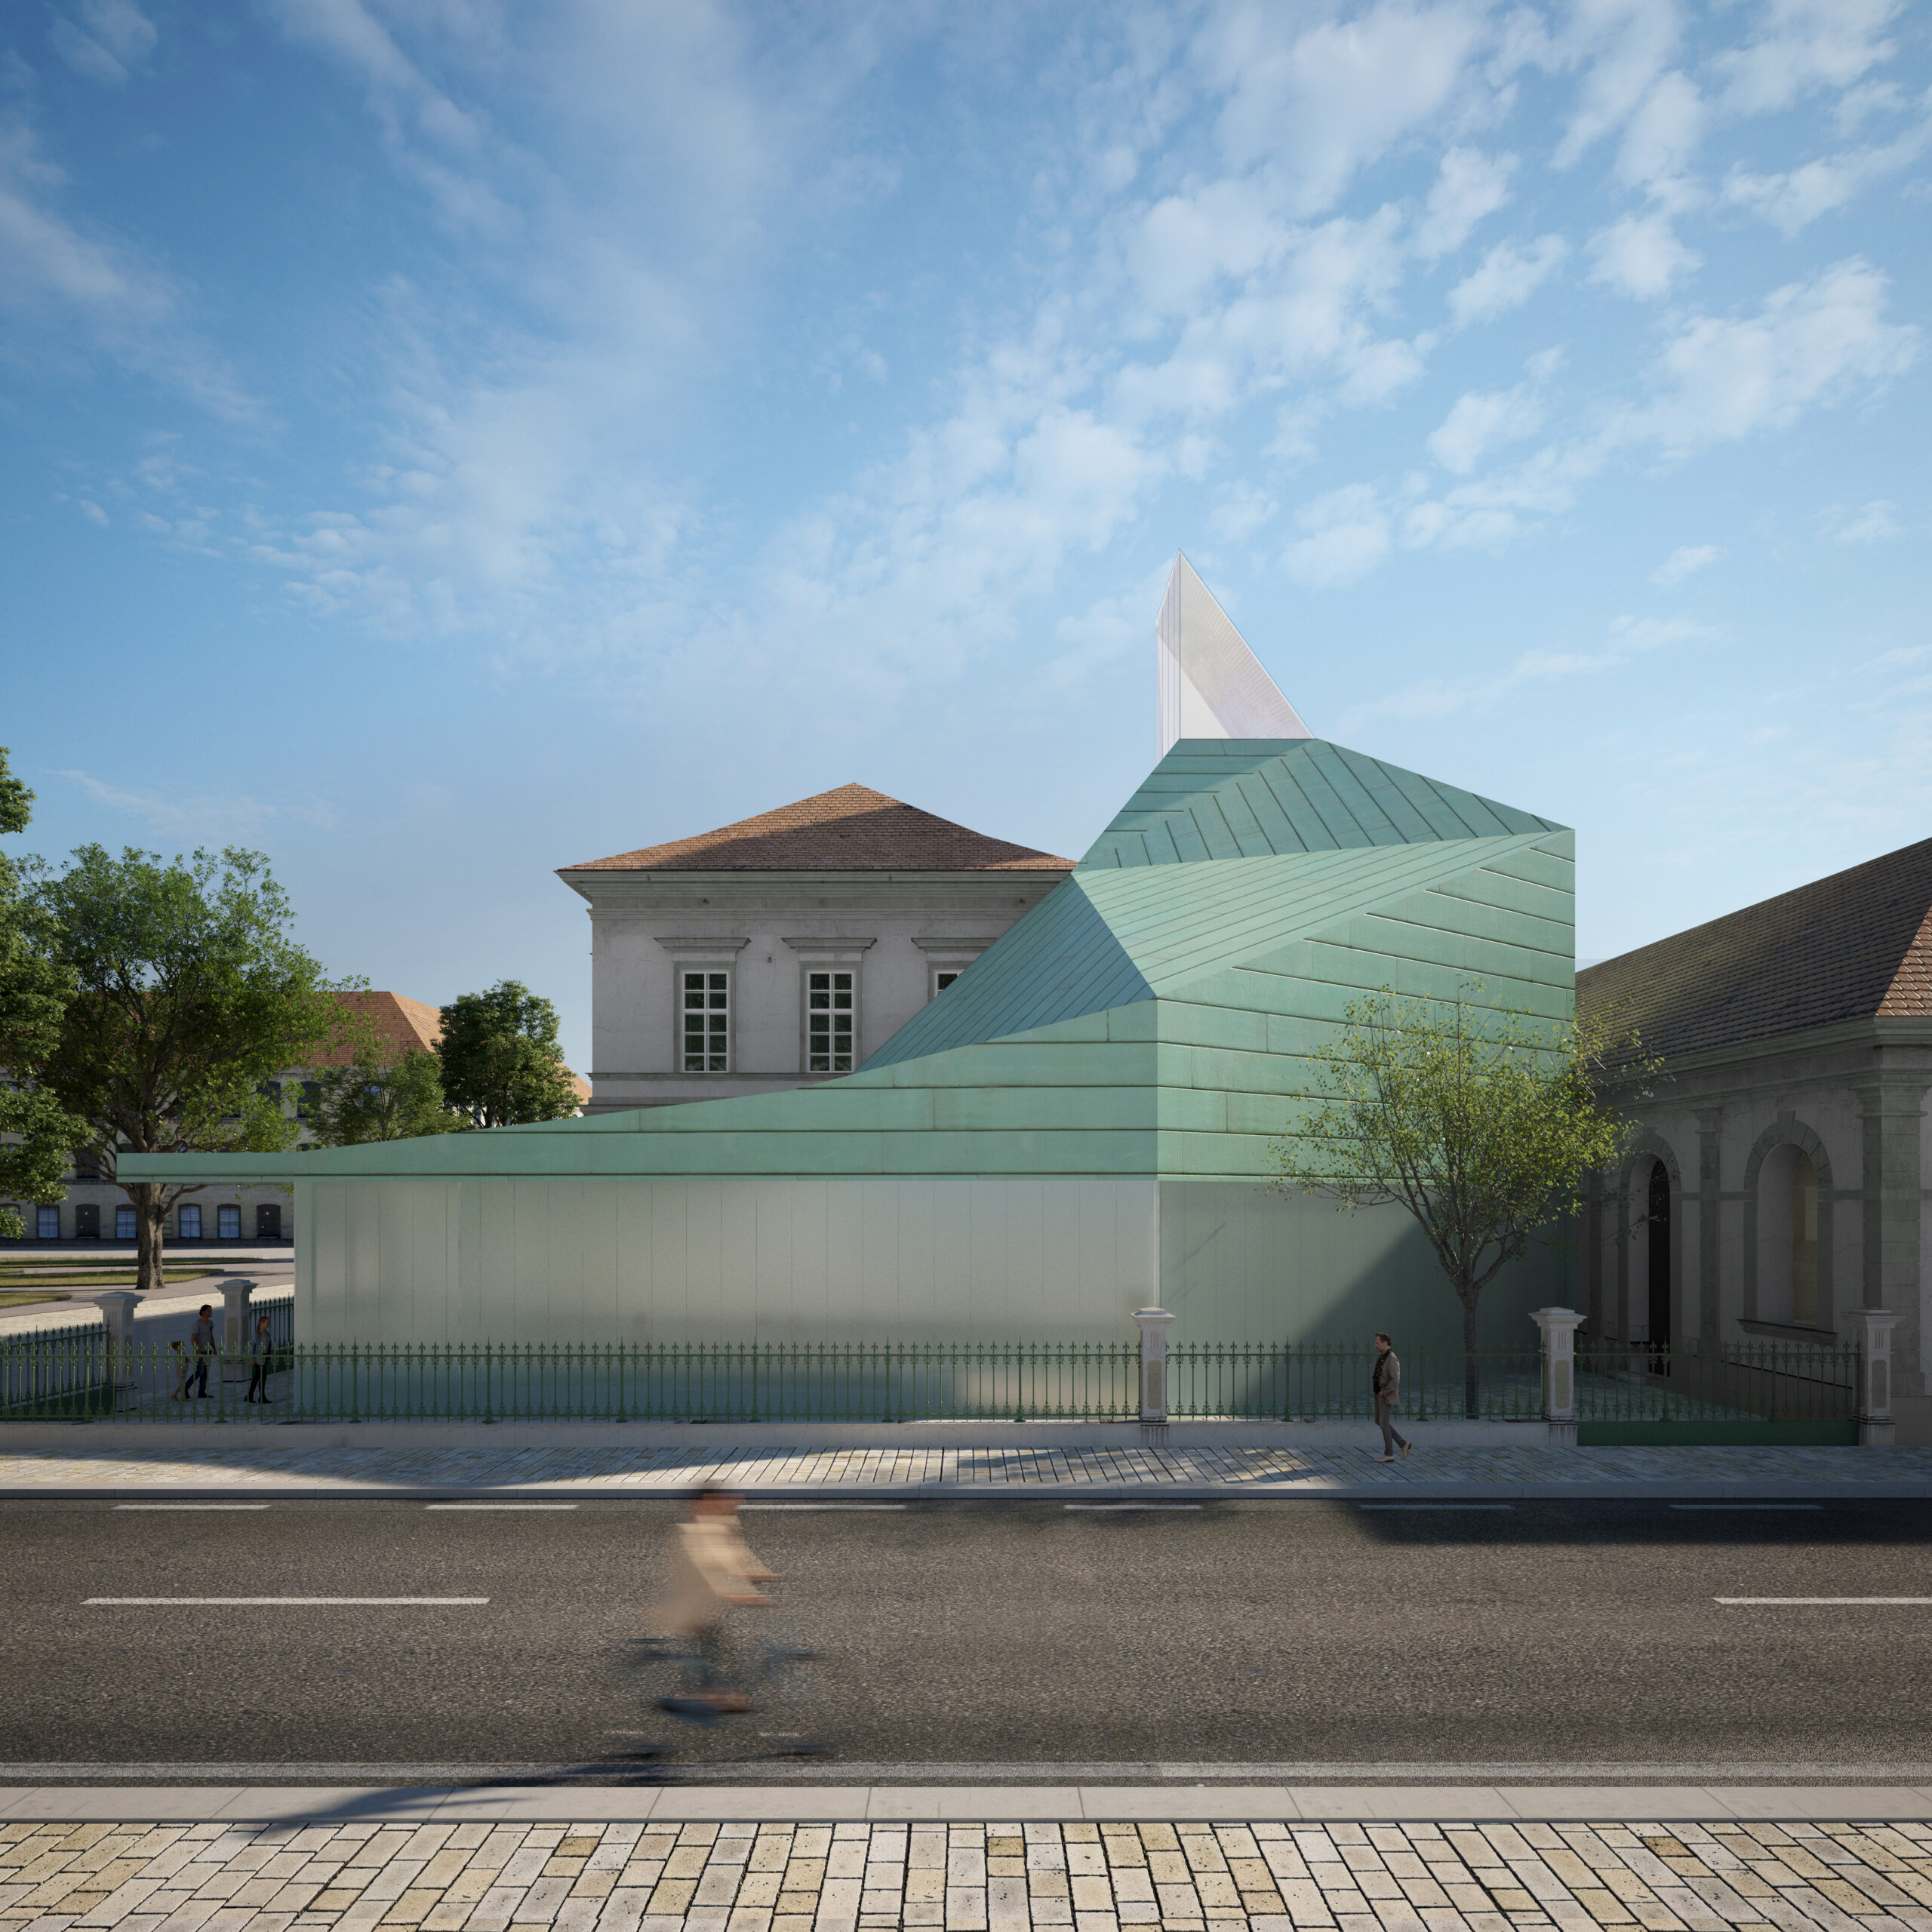 Terezín Ghetto Museum completes Schematic Design phase